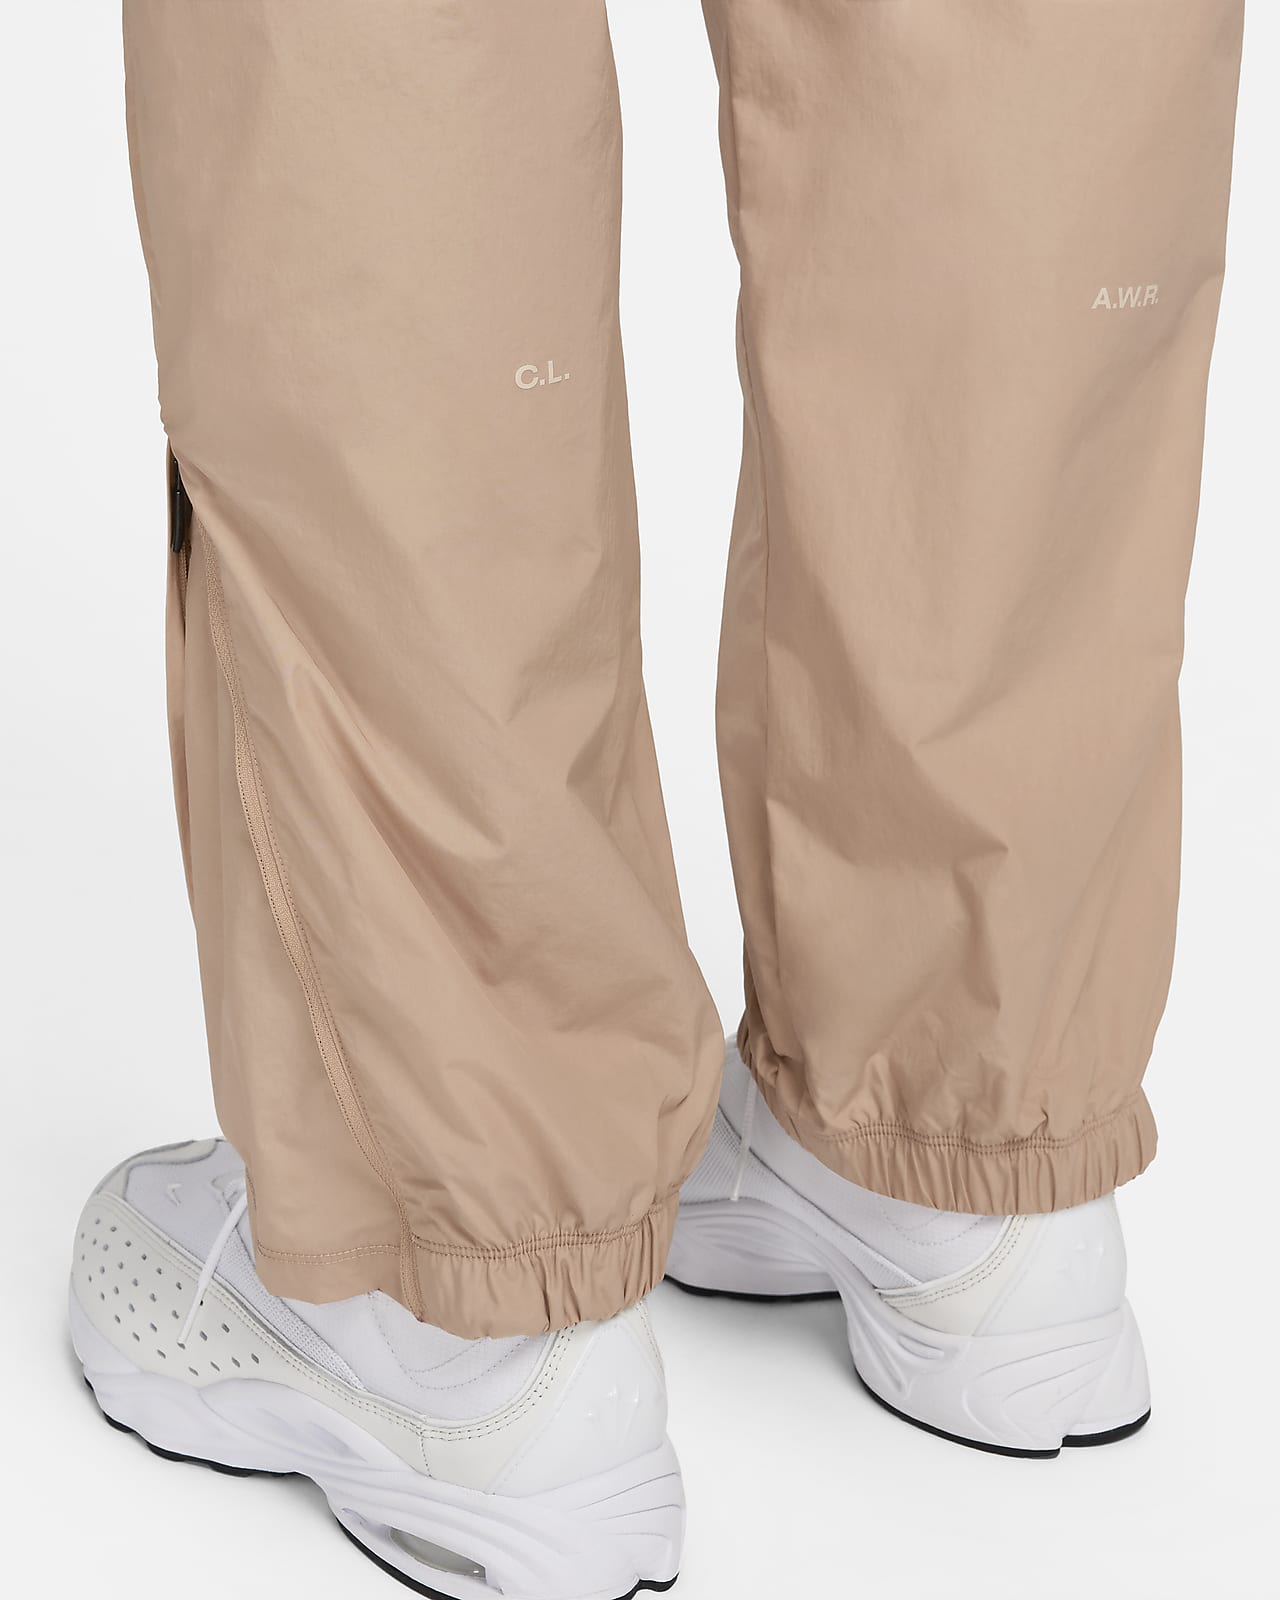 Nylon Joggers & Sweatpants for Young Adult Men | Nordstrom